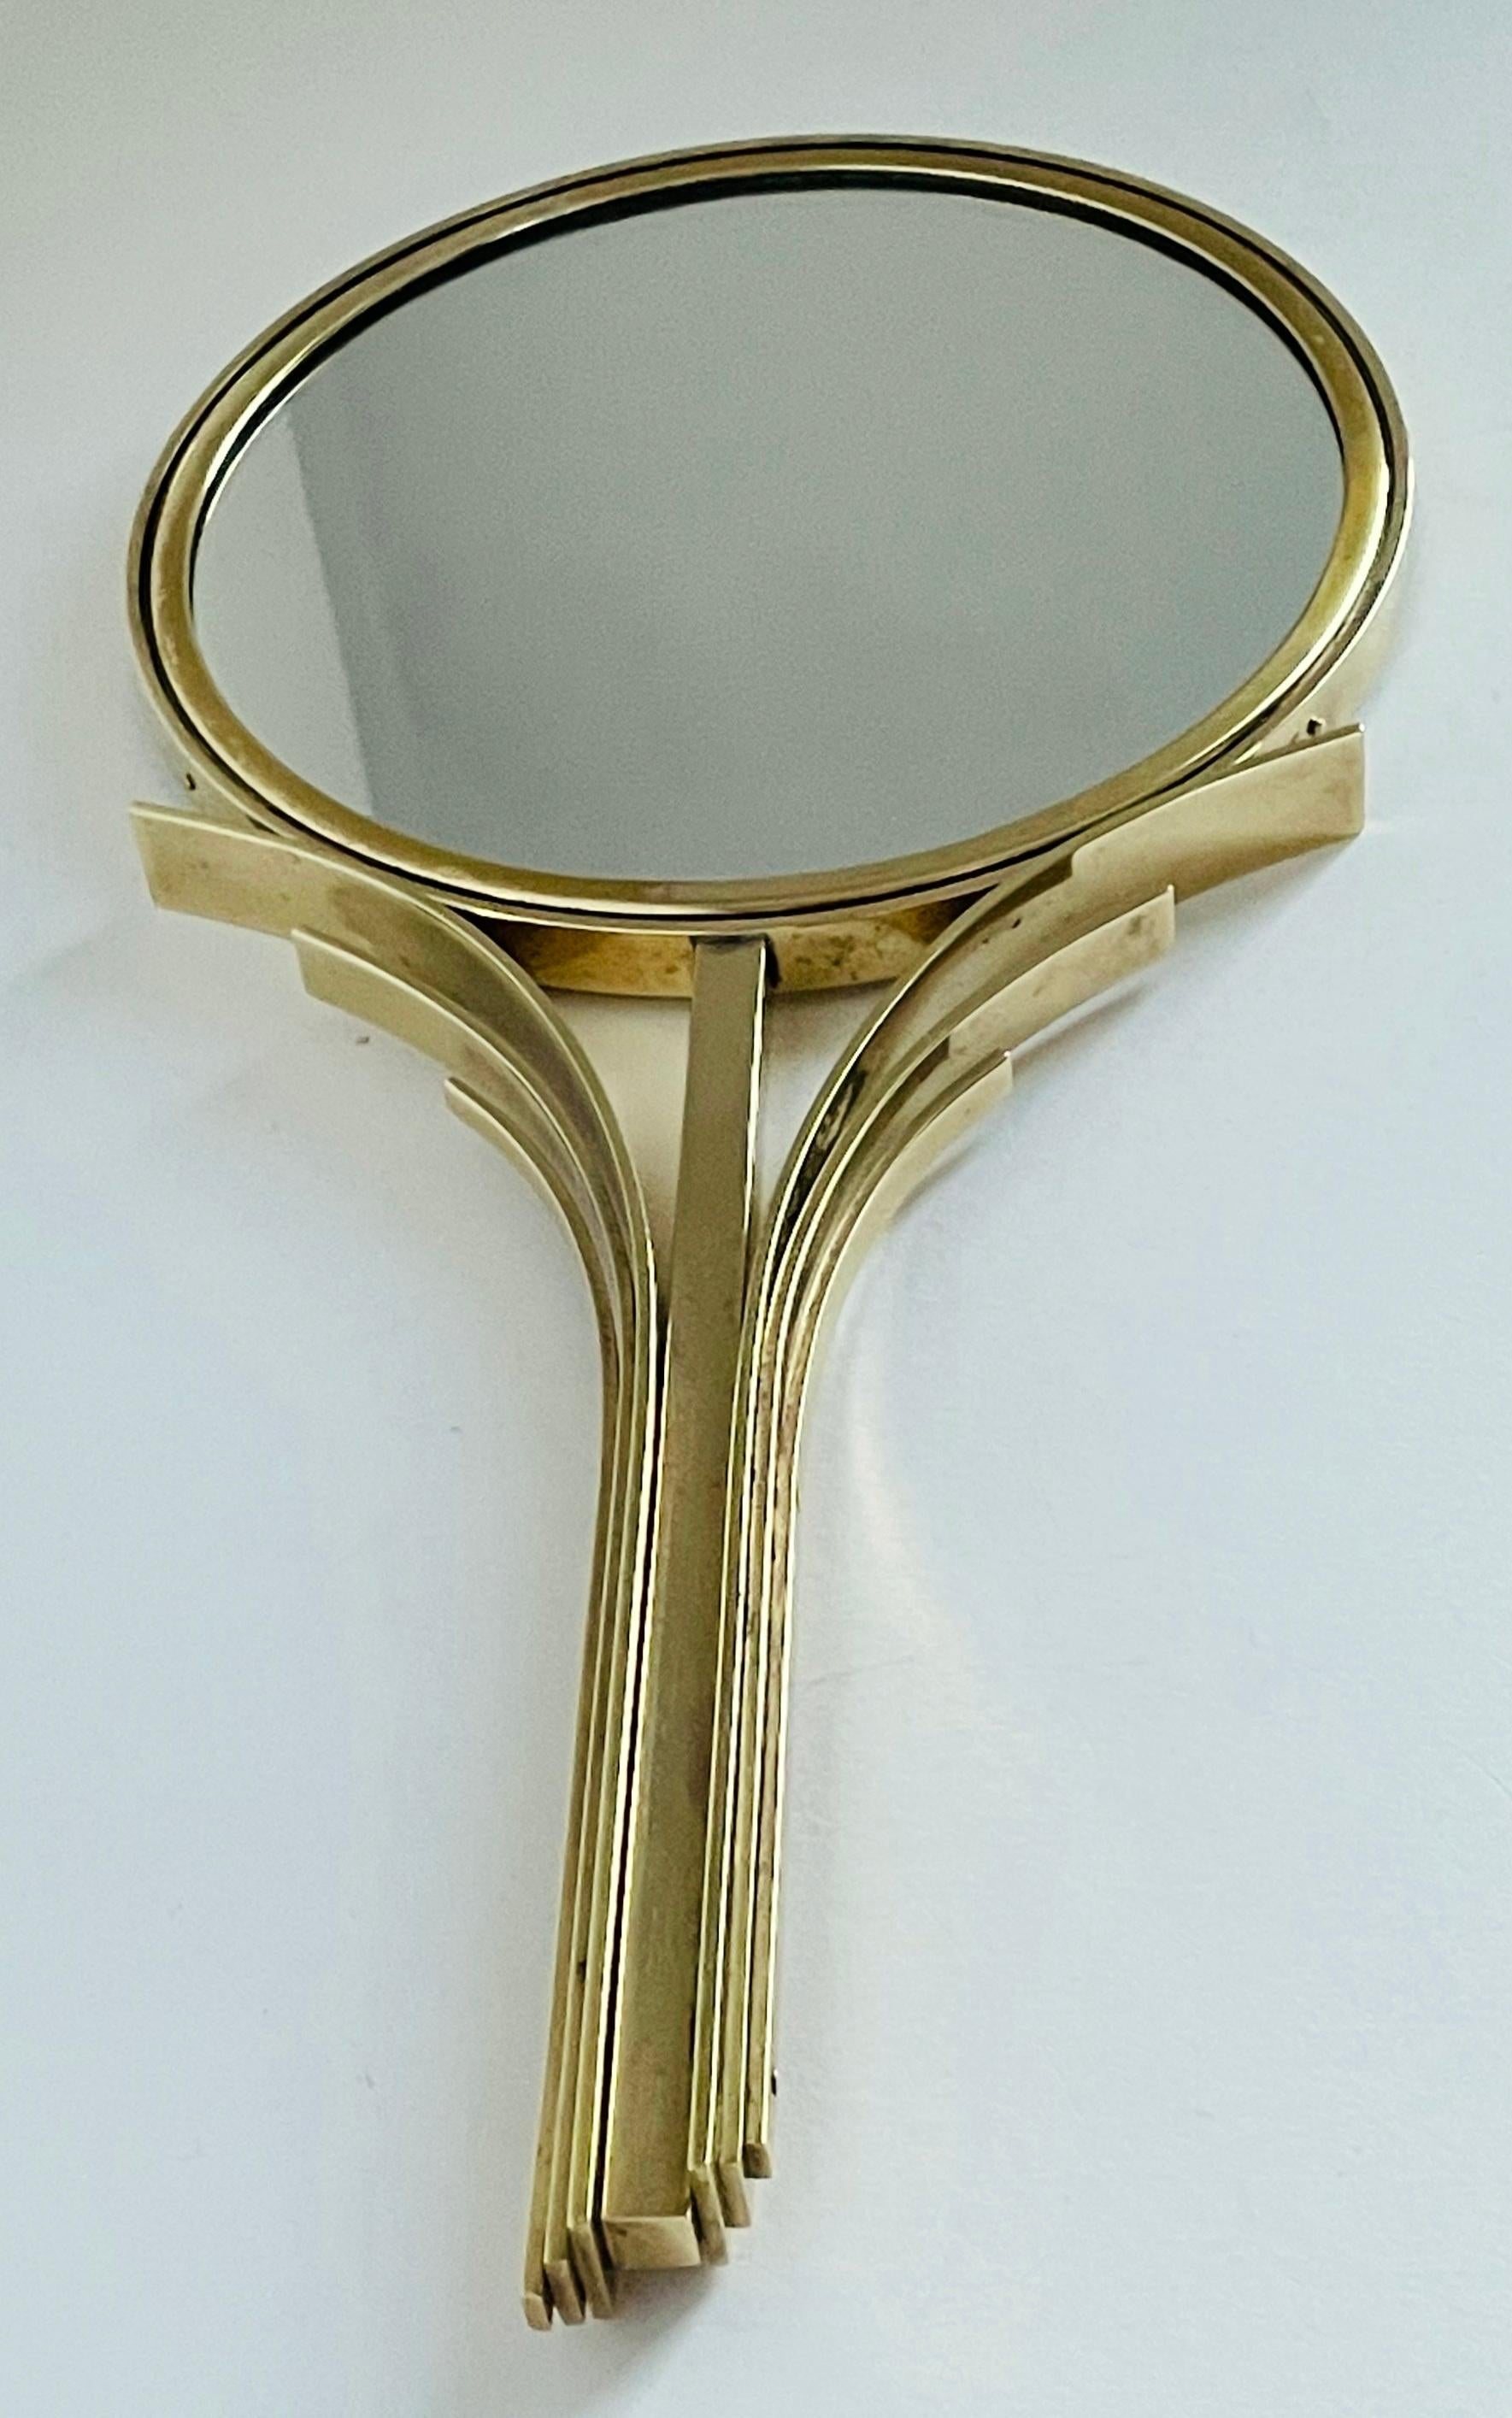 Rare Art deco solid brass hand mirror designed by Ivar Ålenius Björk and produced by Ystad Metall, Sweden in the 1930s. 
Measures: width 16 cm, height 32 cm.

